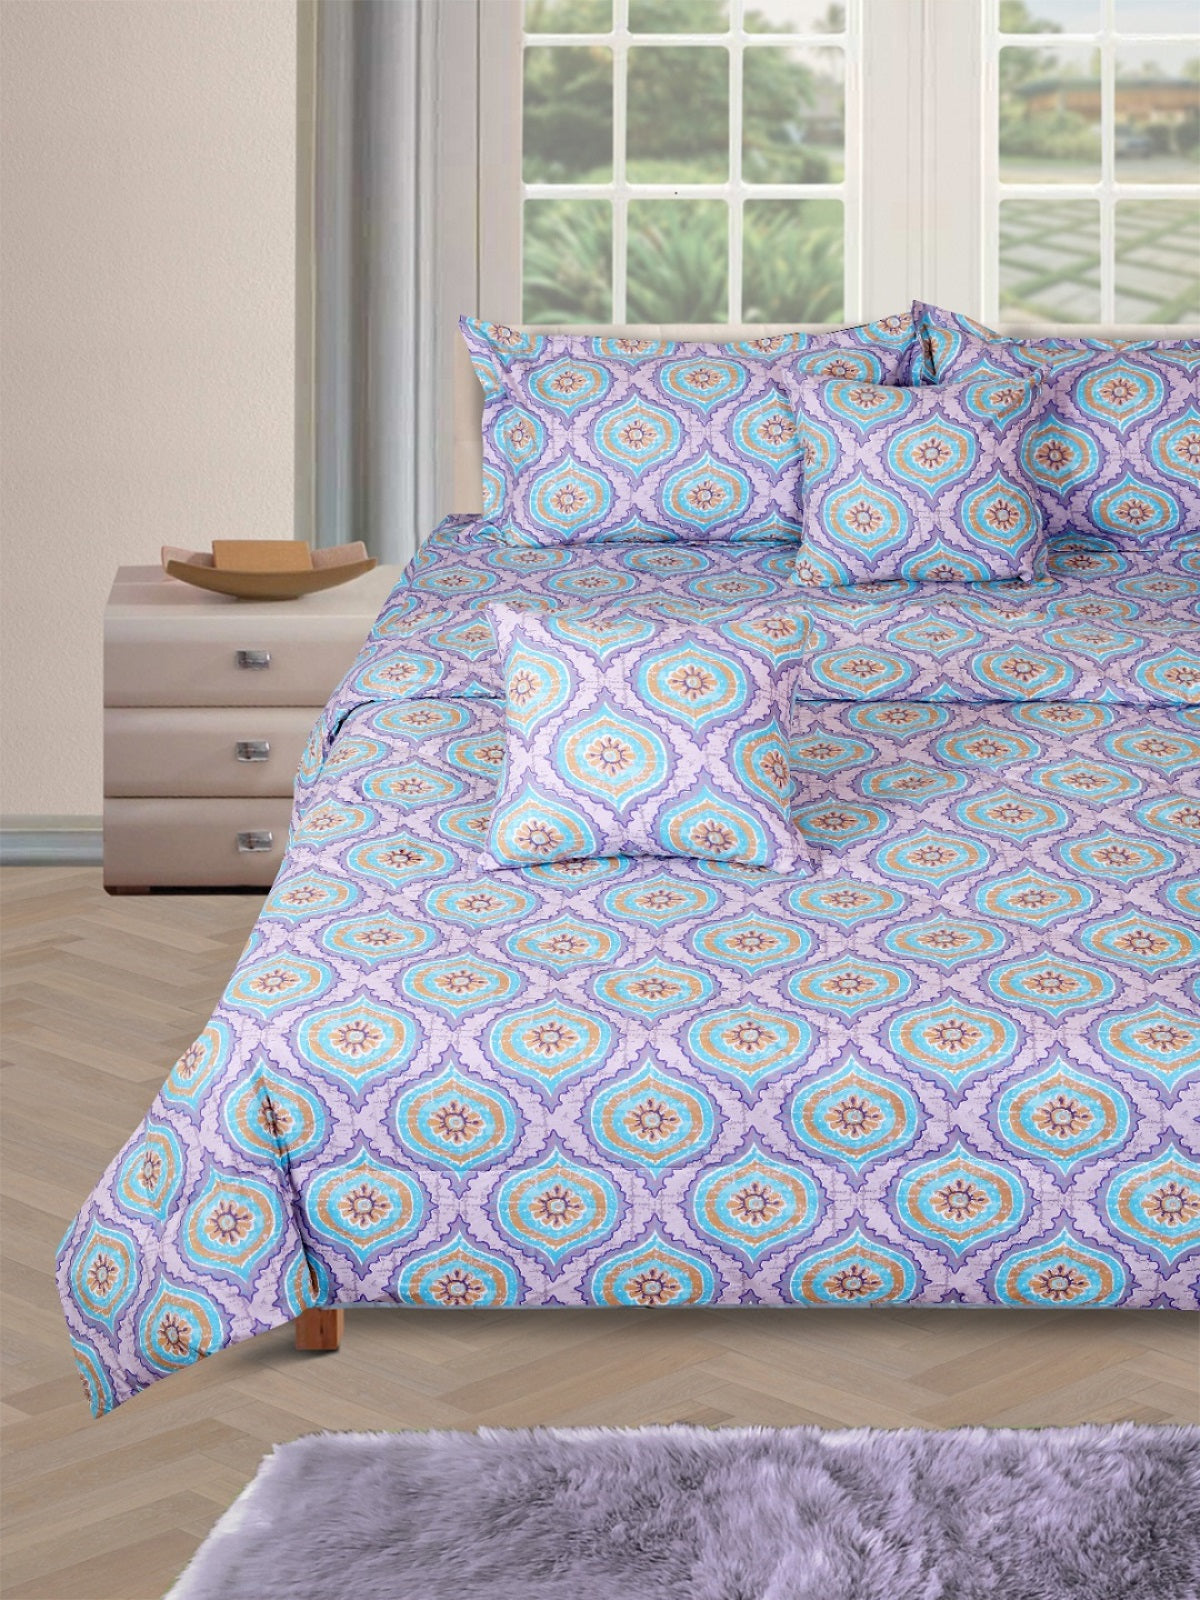 Blue Ethnic Motifs Printed Cotton Double Queen Bedding Set With Pillow Cover